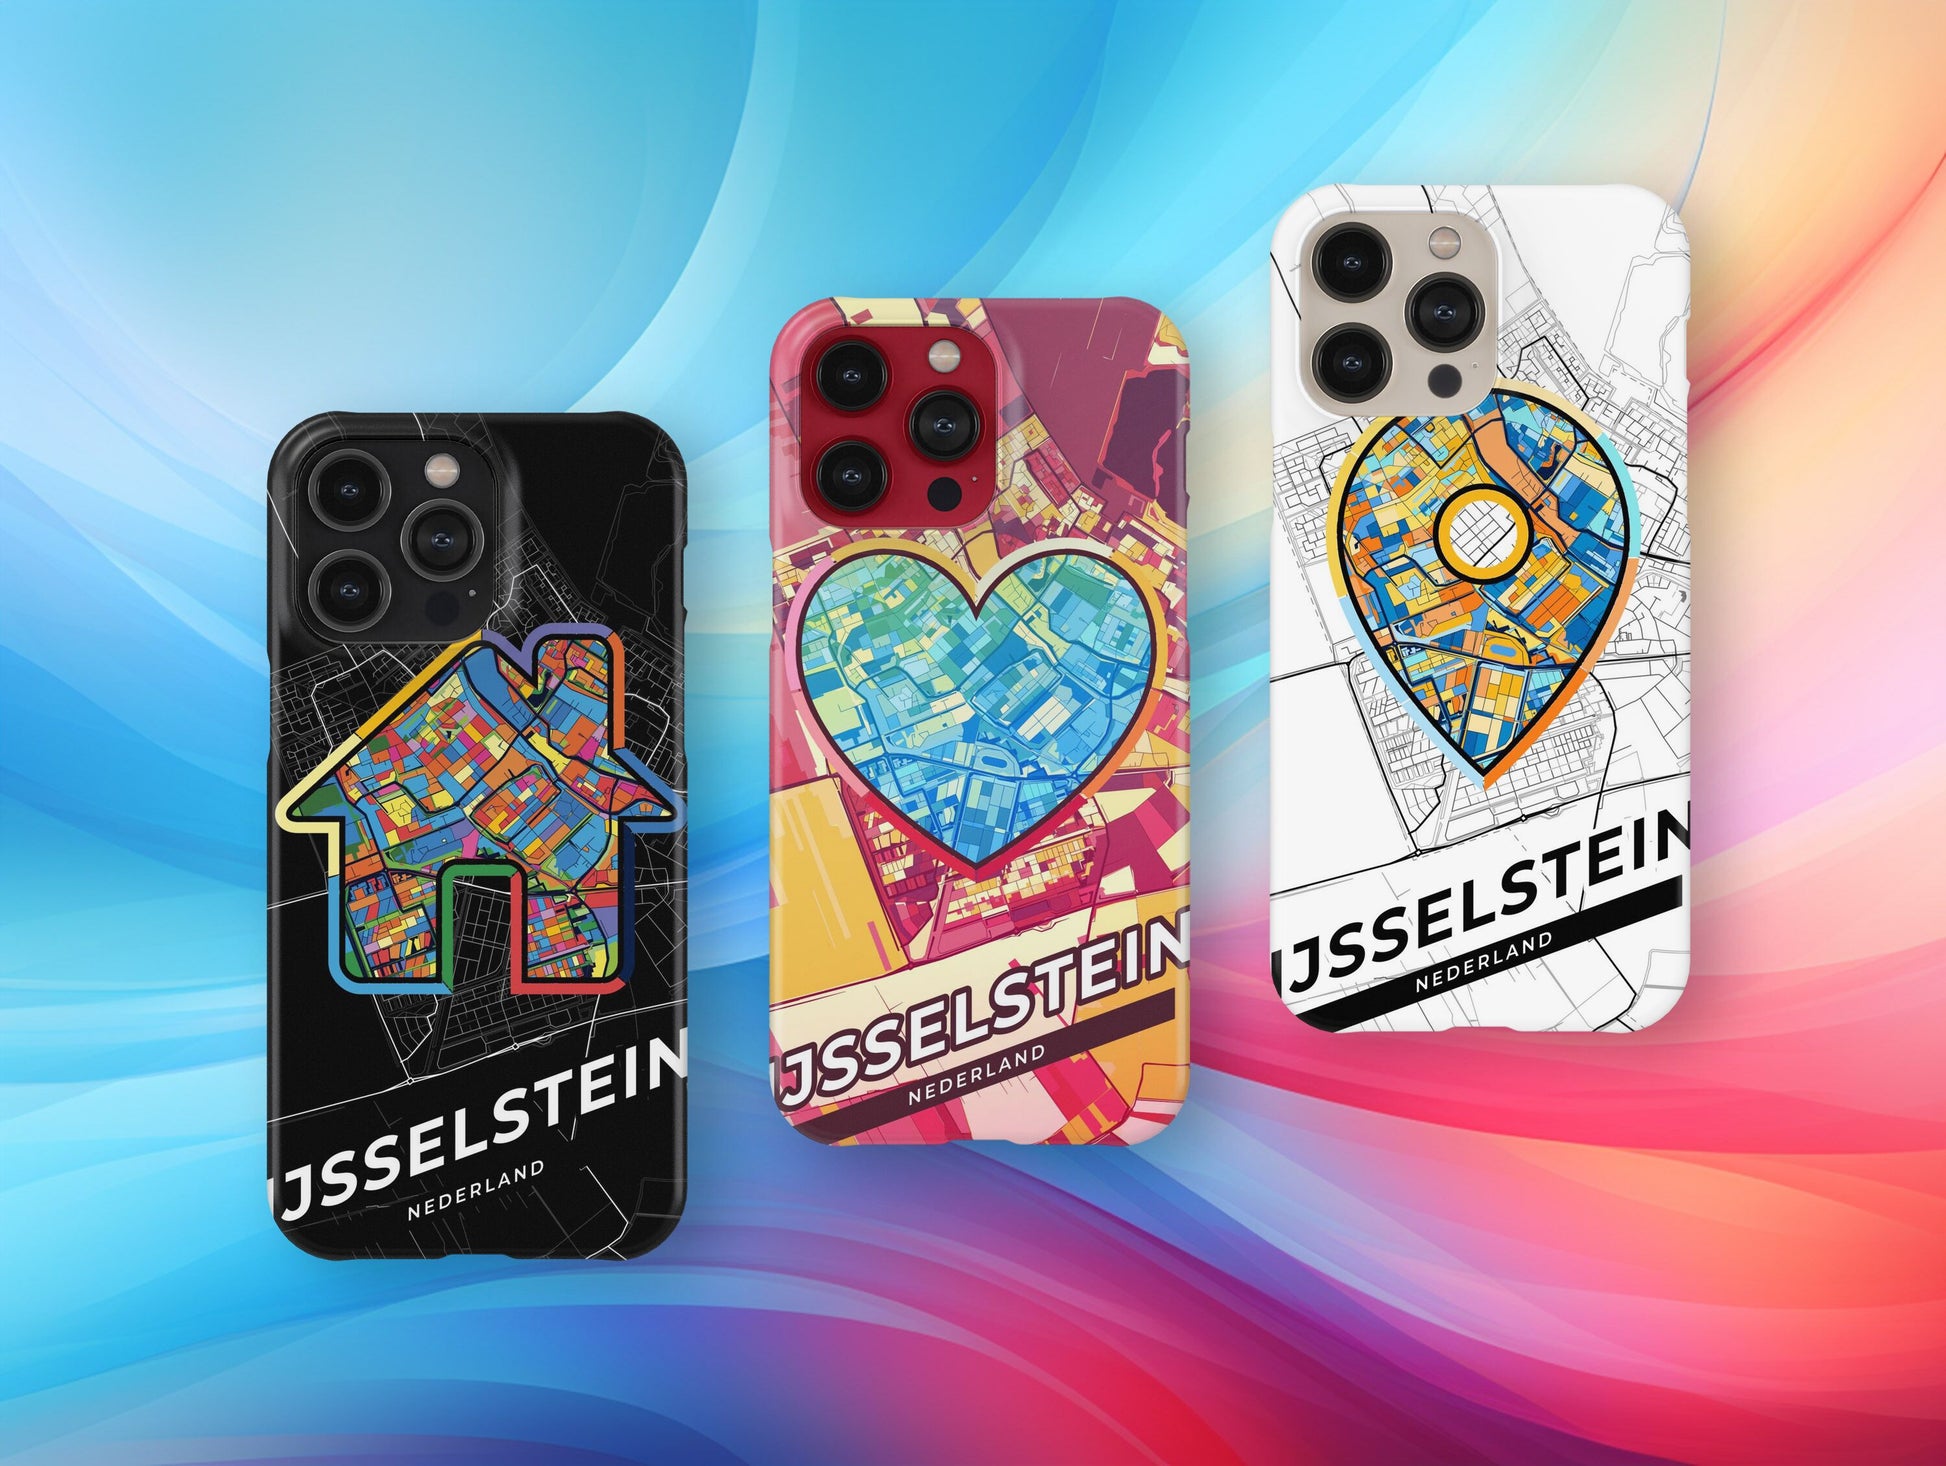 Ijsselstein Netherlands slim phone case with colorful icon. Birthday, wedding or housewarming gift. Couple match cases.